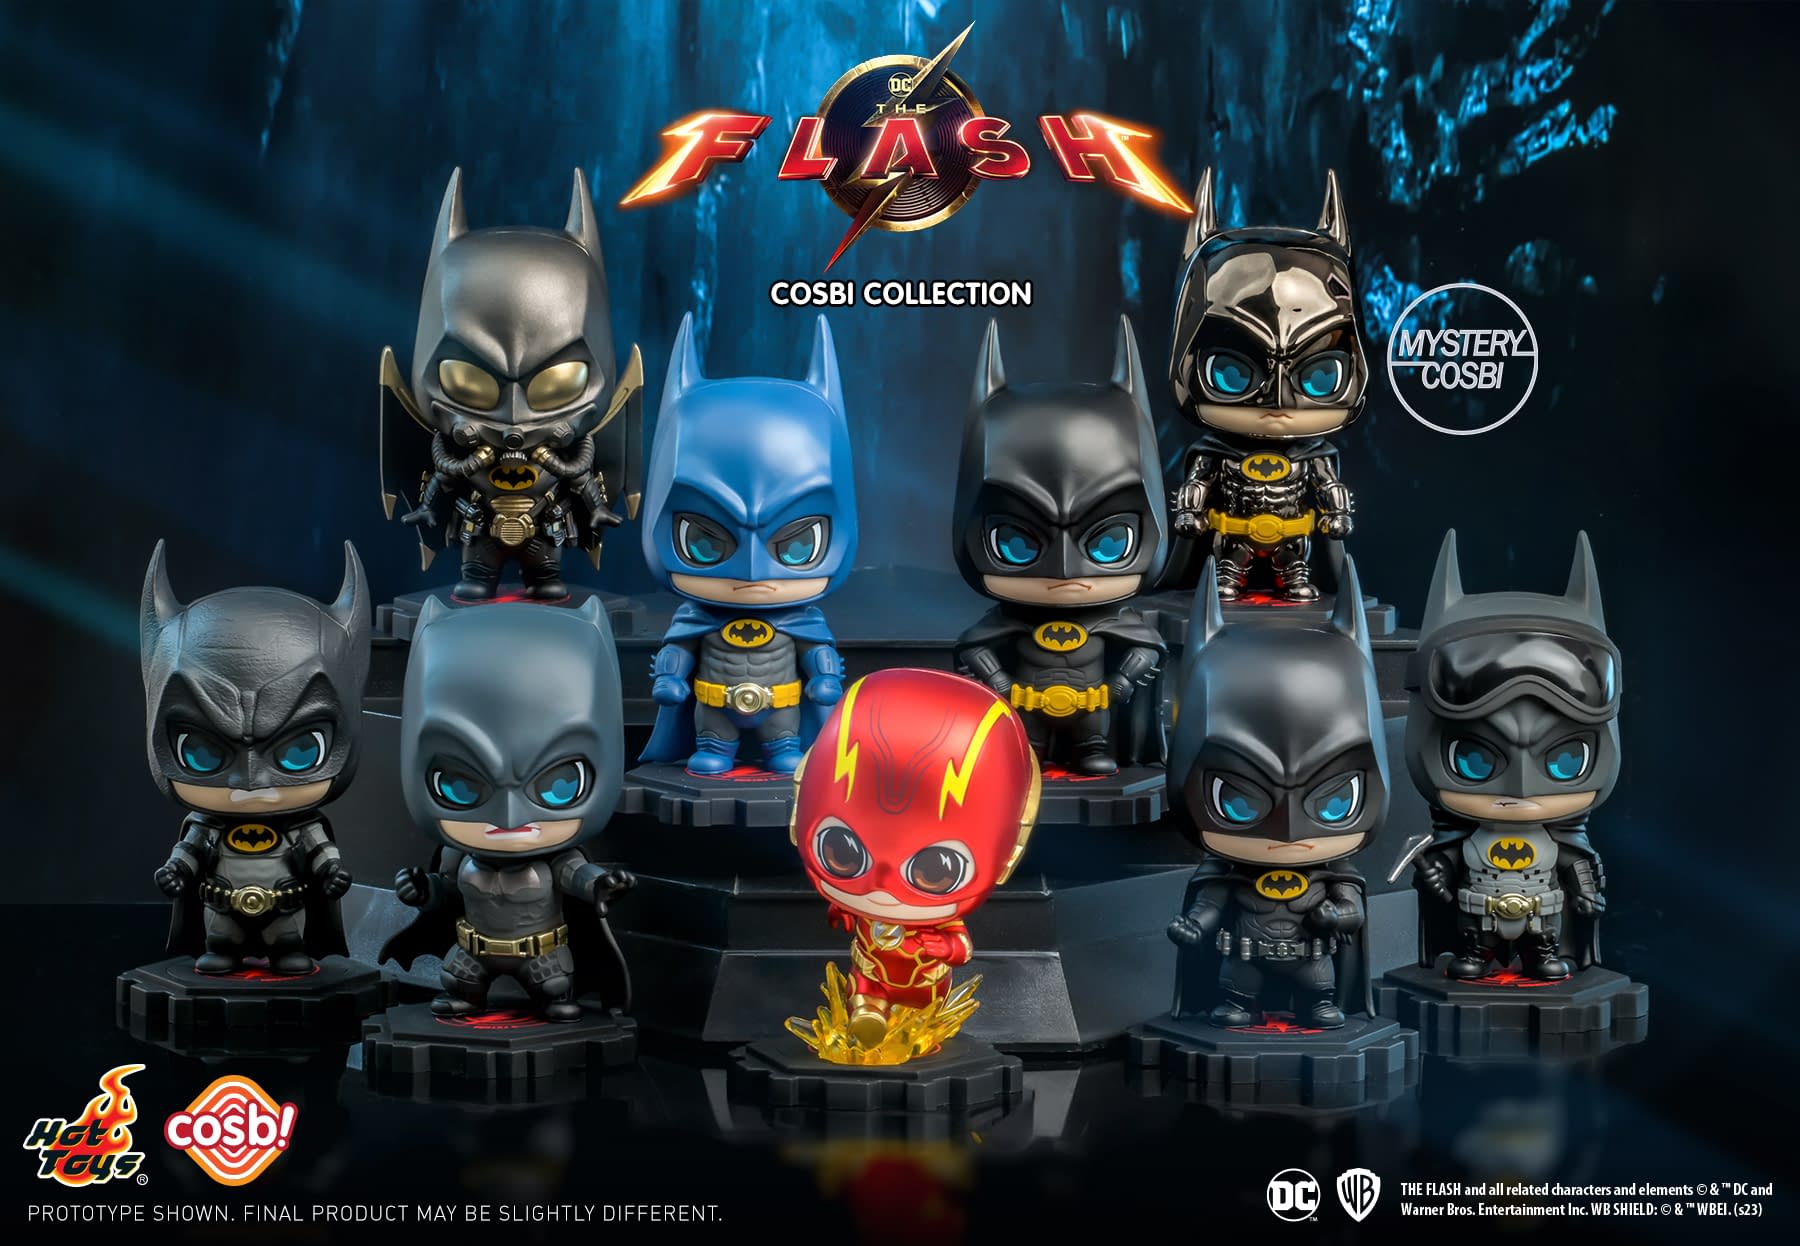 Enter the Speed Force with Hot Toys New The Flash Cosbi Collection